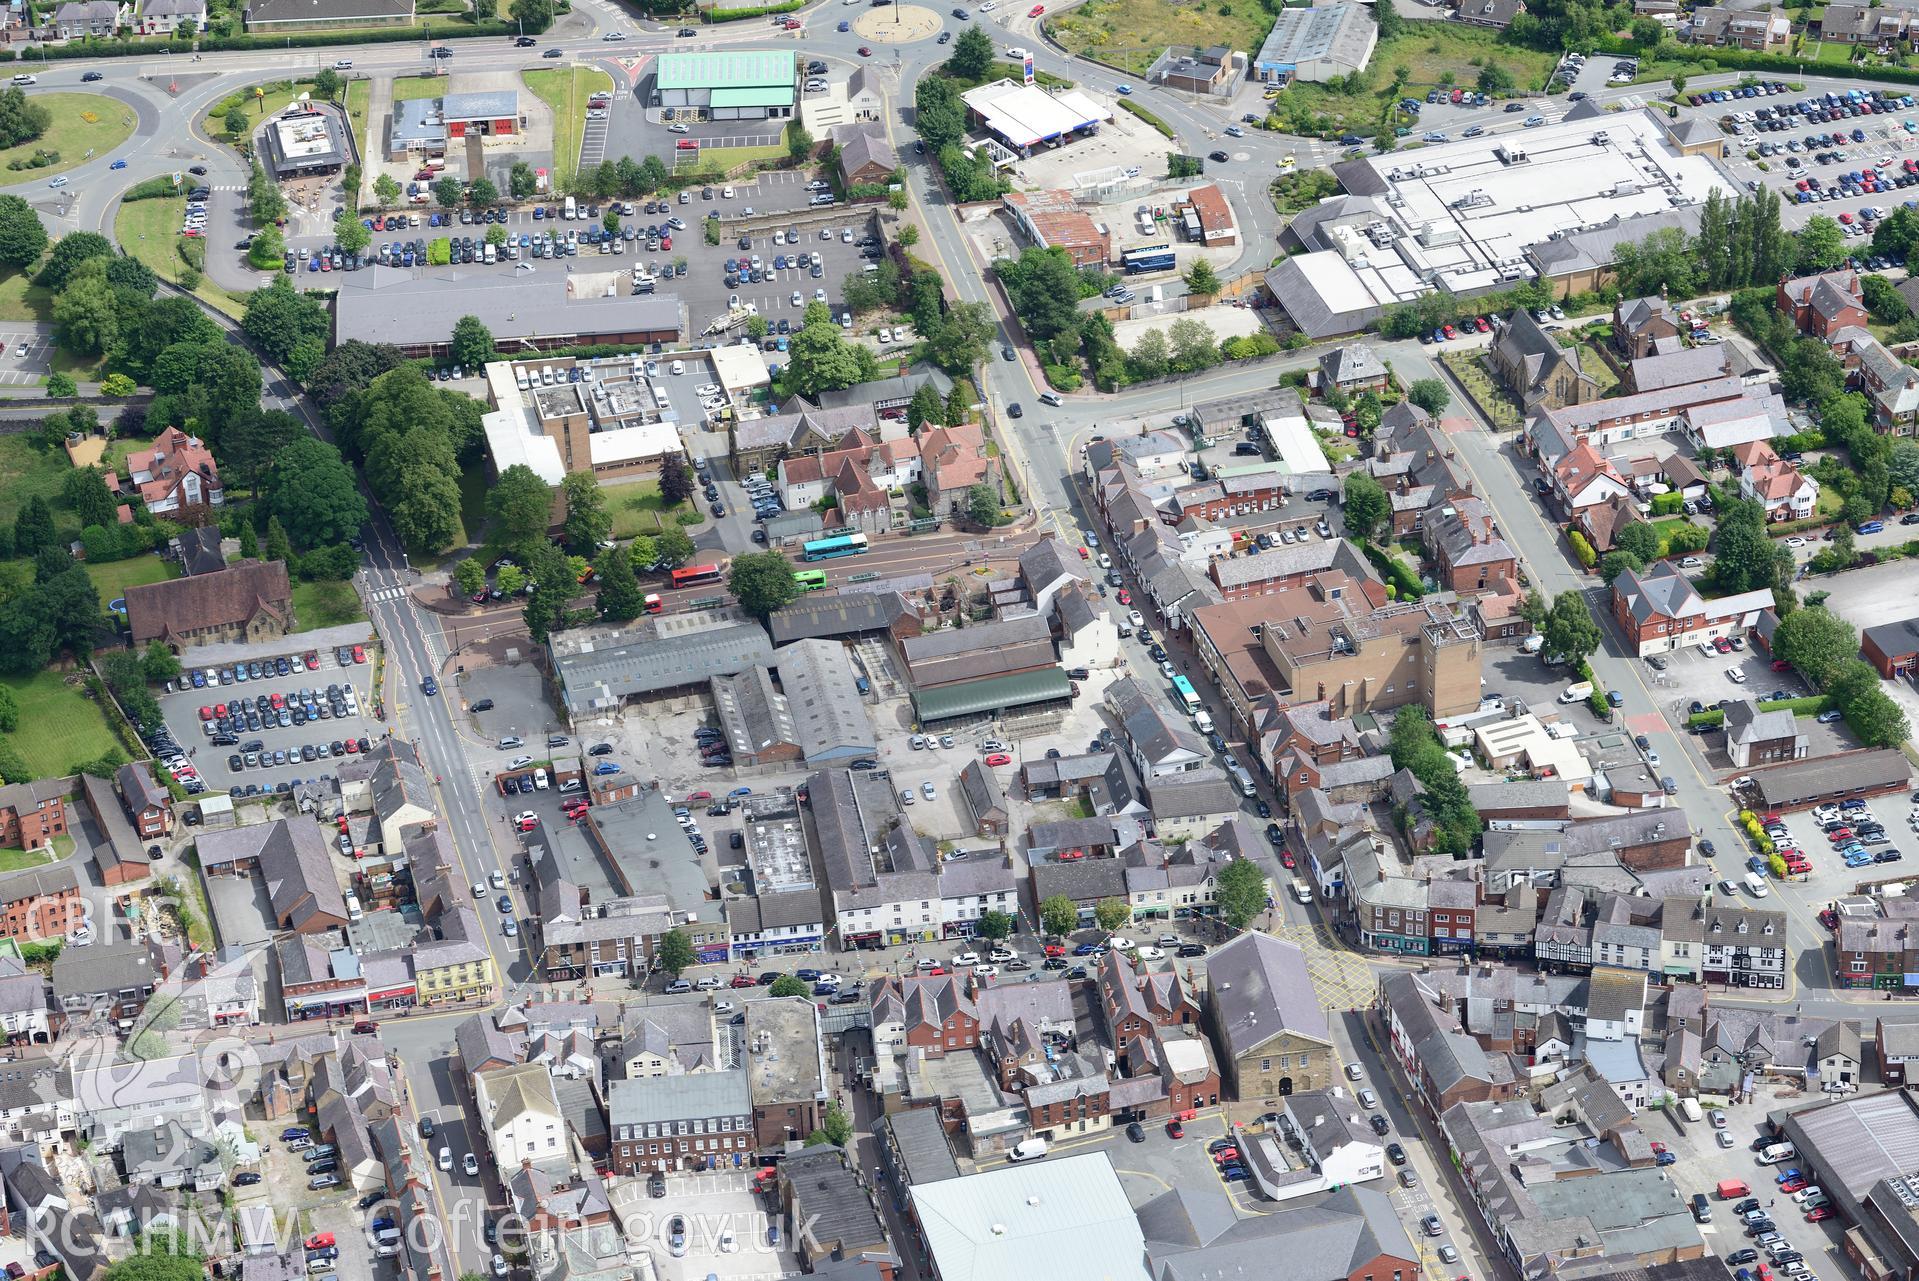 Mold county hall, railway station, Lloyd's TSB bank, Methodist Chapel and Sunny Bank, Mold. Oblique aerial photograph taken during the Royal Commission's programme of archaeological aerial reconnaissance by Toby Driver on 30th July 2015.